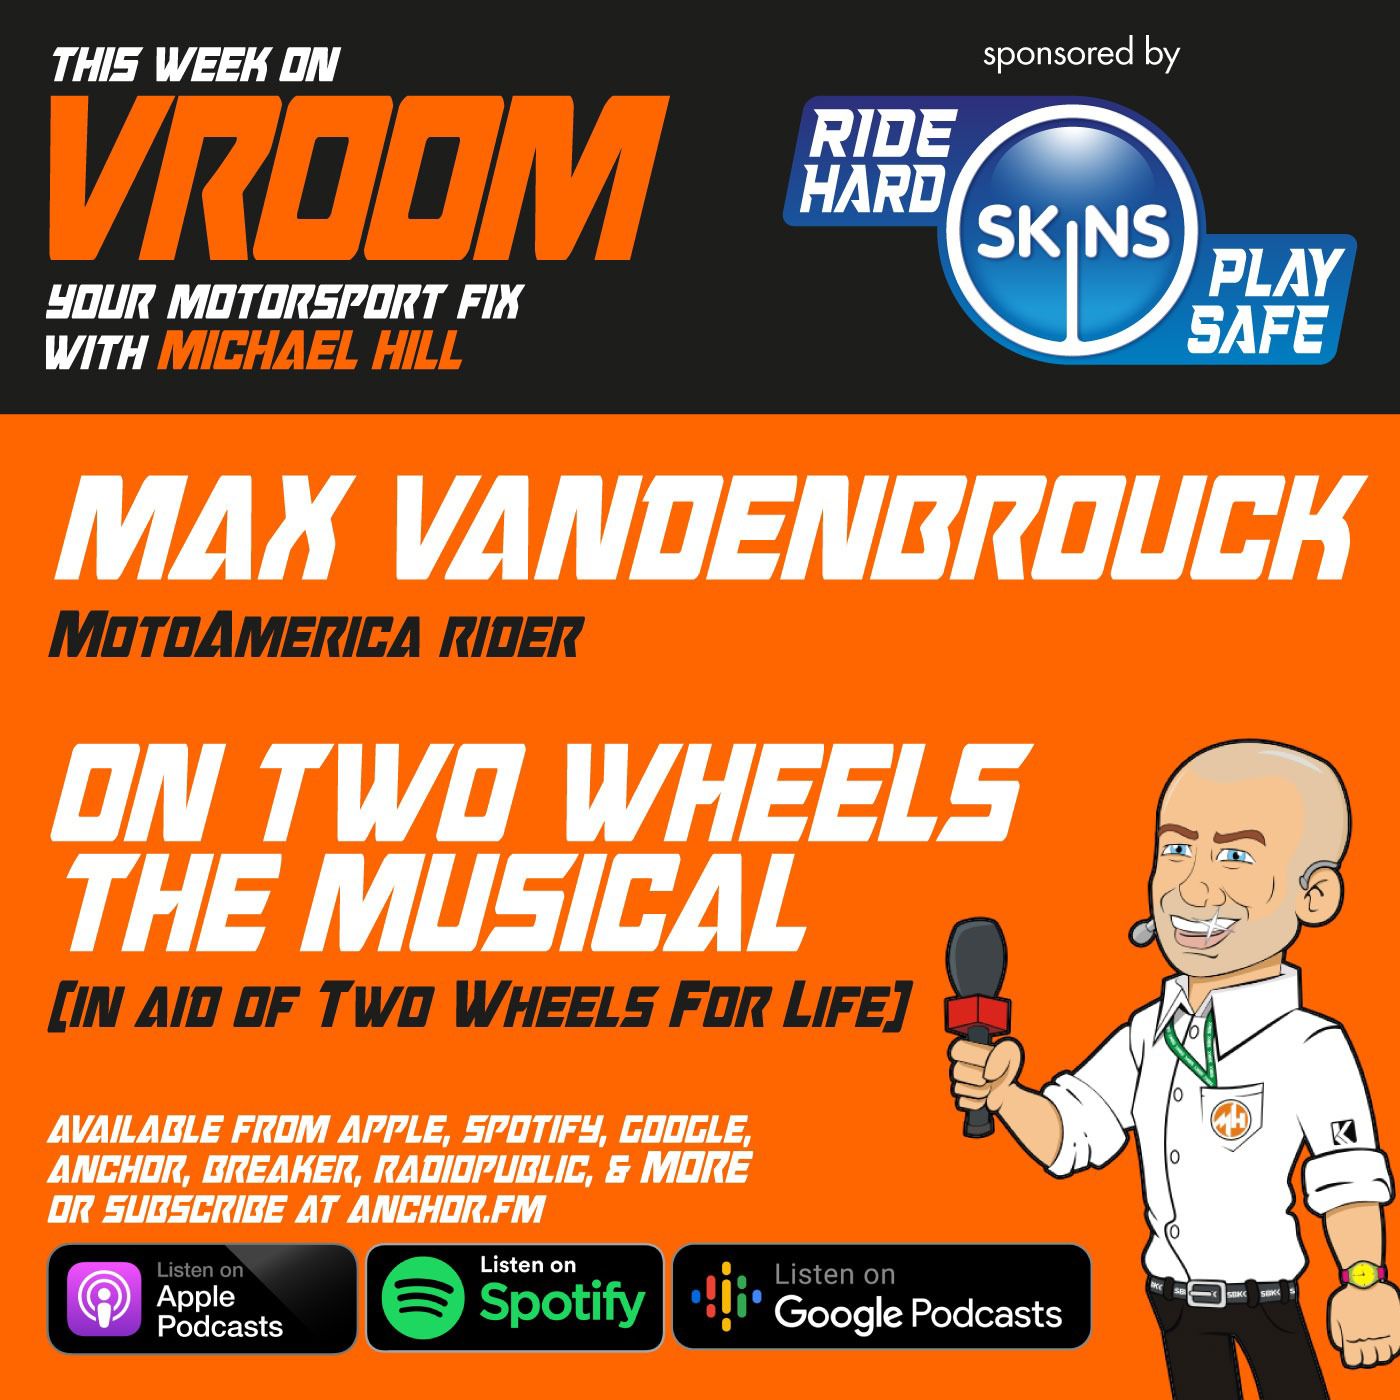 Vroom – Your Motorsport Fix, Episode 57 – Max Vandenbrouck, And “on Two Wheels – The Musical”